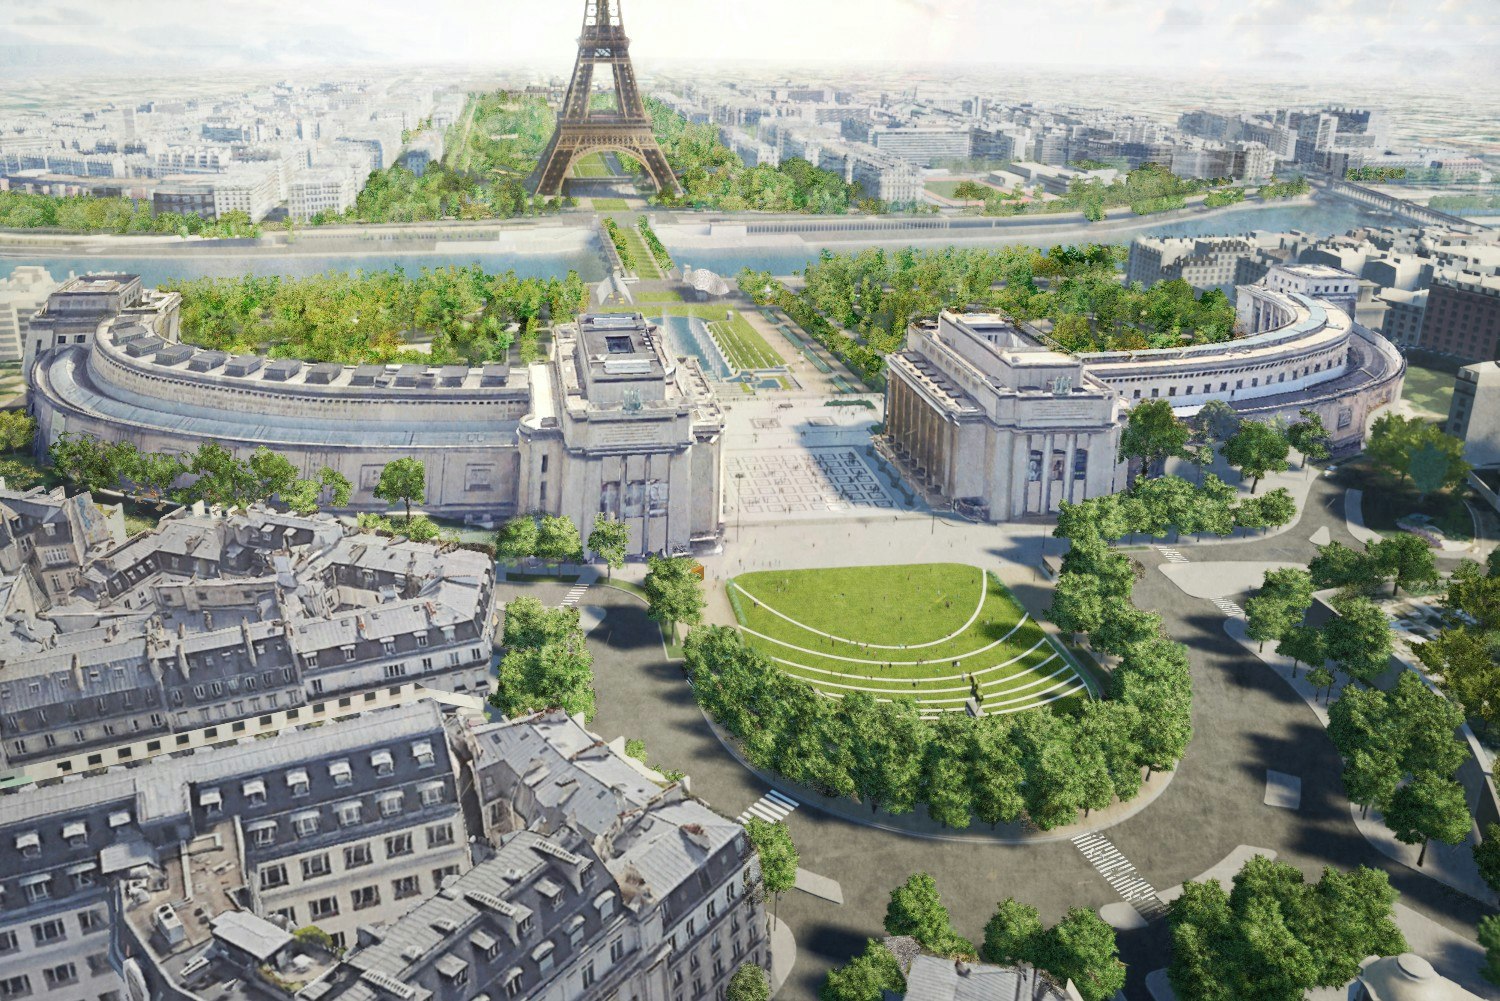 A rendering of the new redesign of the area around the Eiffel Tower.